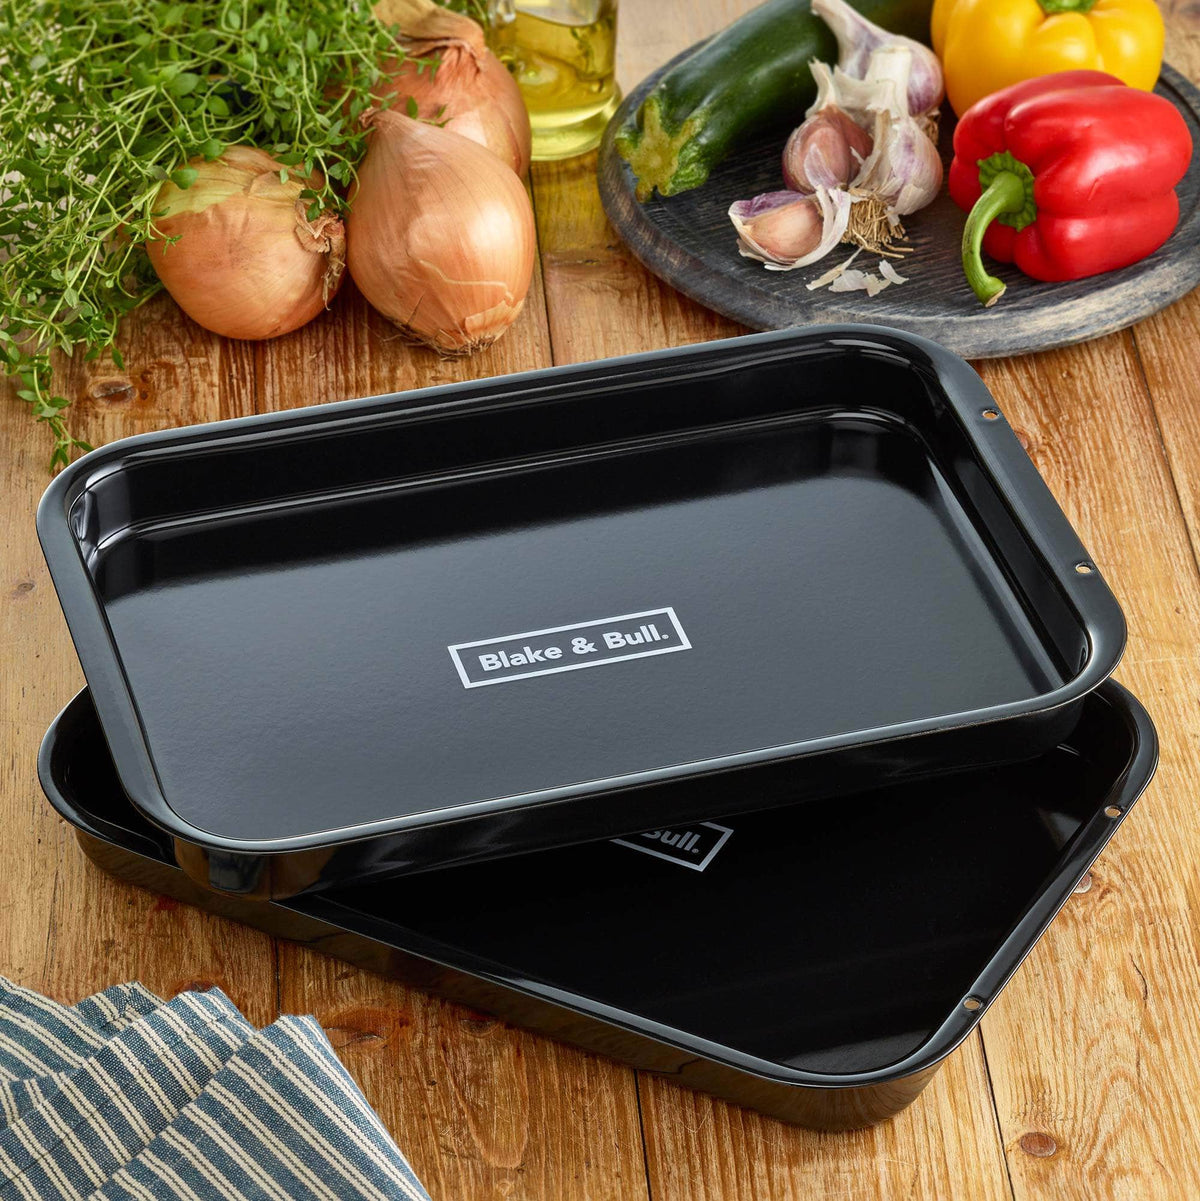 &#39;Fits on runners&#39; black enamelled tray bake for use with Aga range cookers &#39;half oven&#39; size